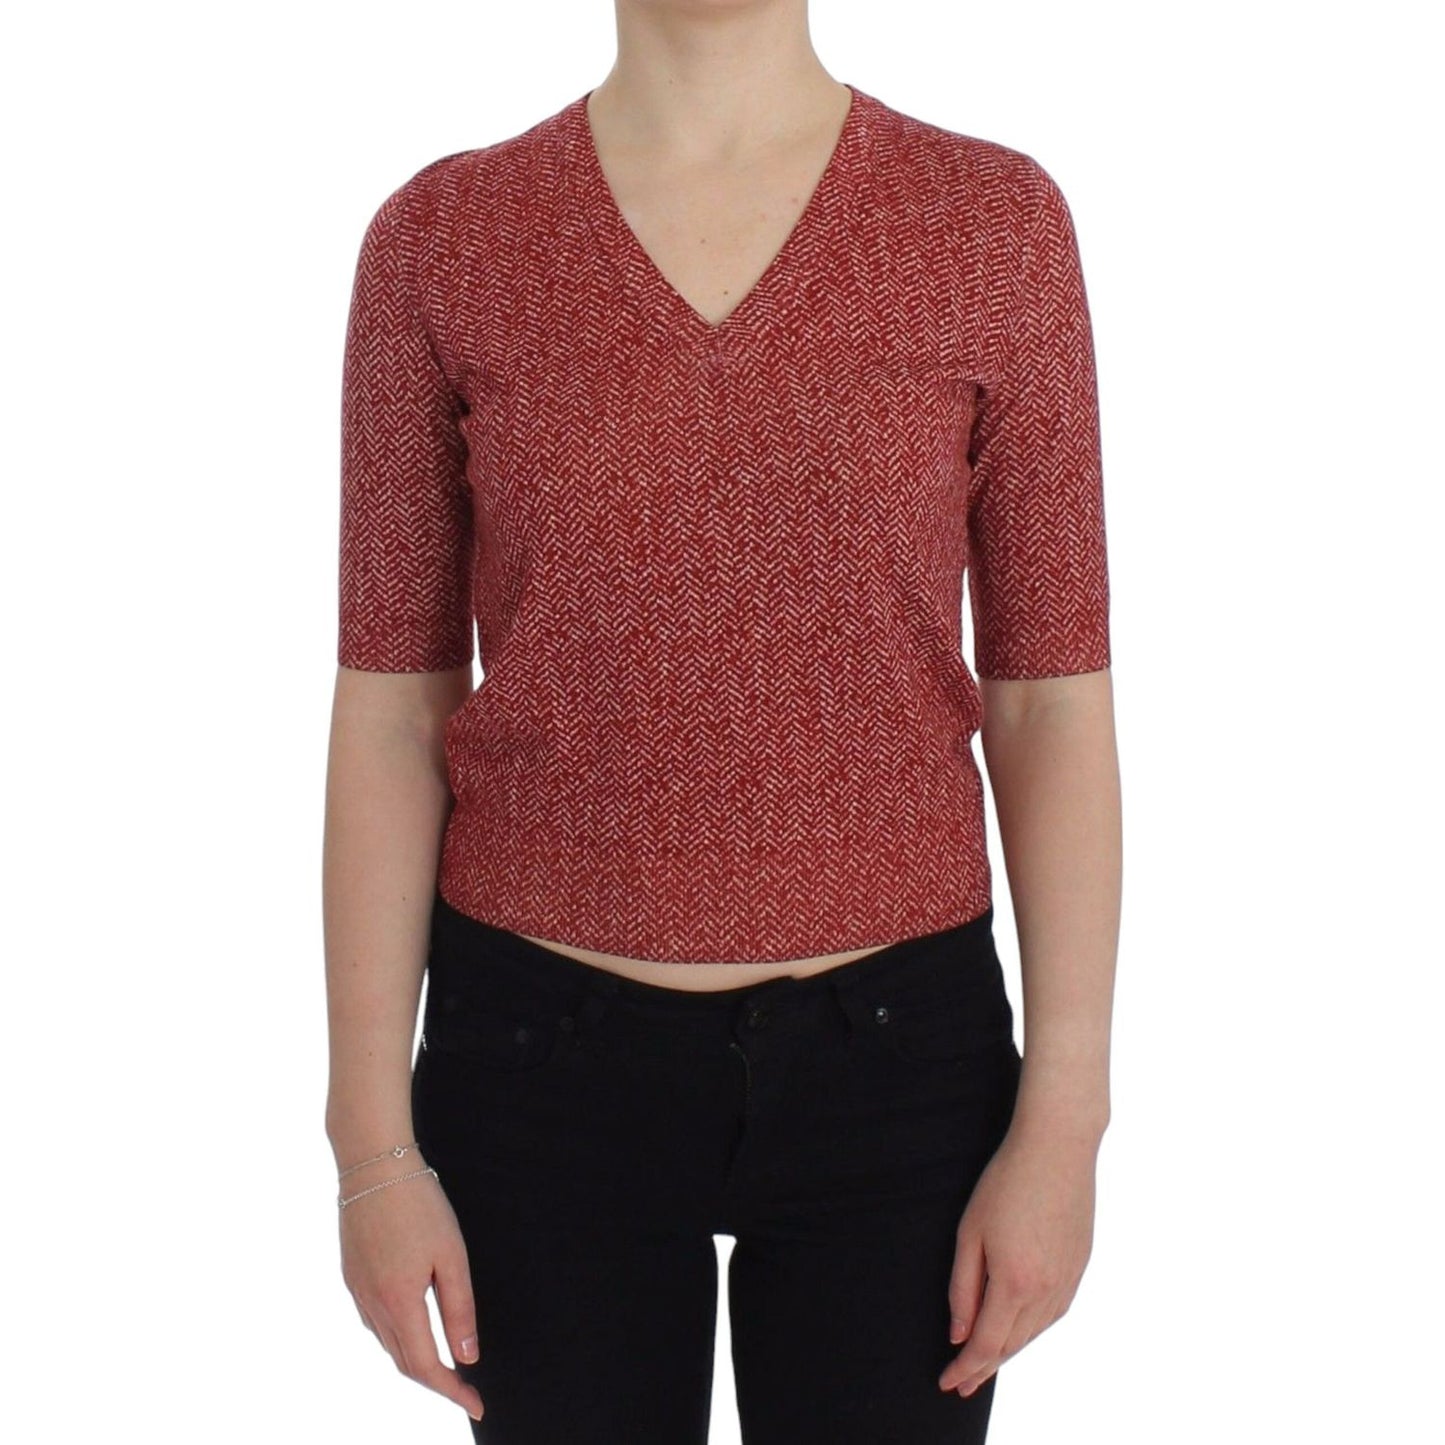 Dolce & Gabbana Enchanting Red Tweed V-Neck Sweater red-wool-tweed-short-sleeve-sweater-pullover